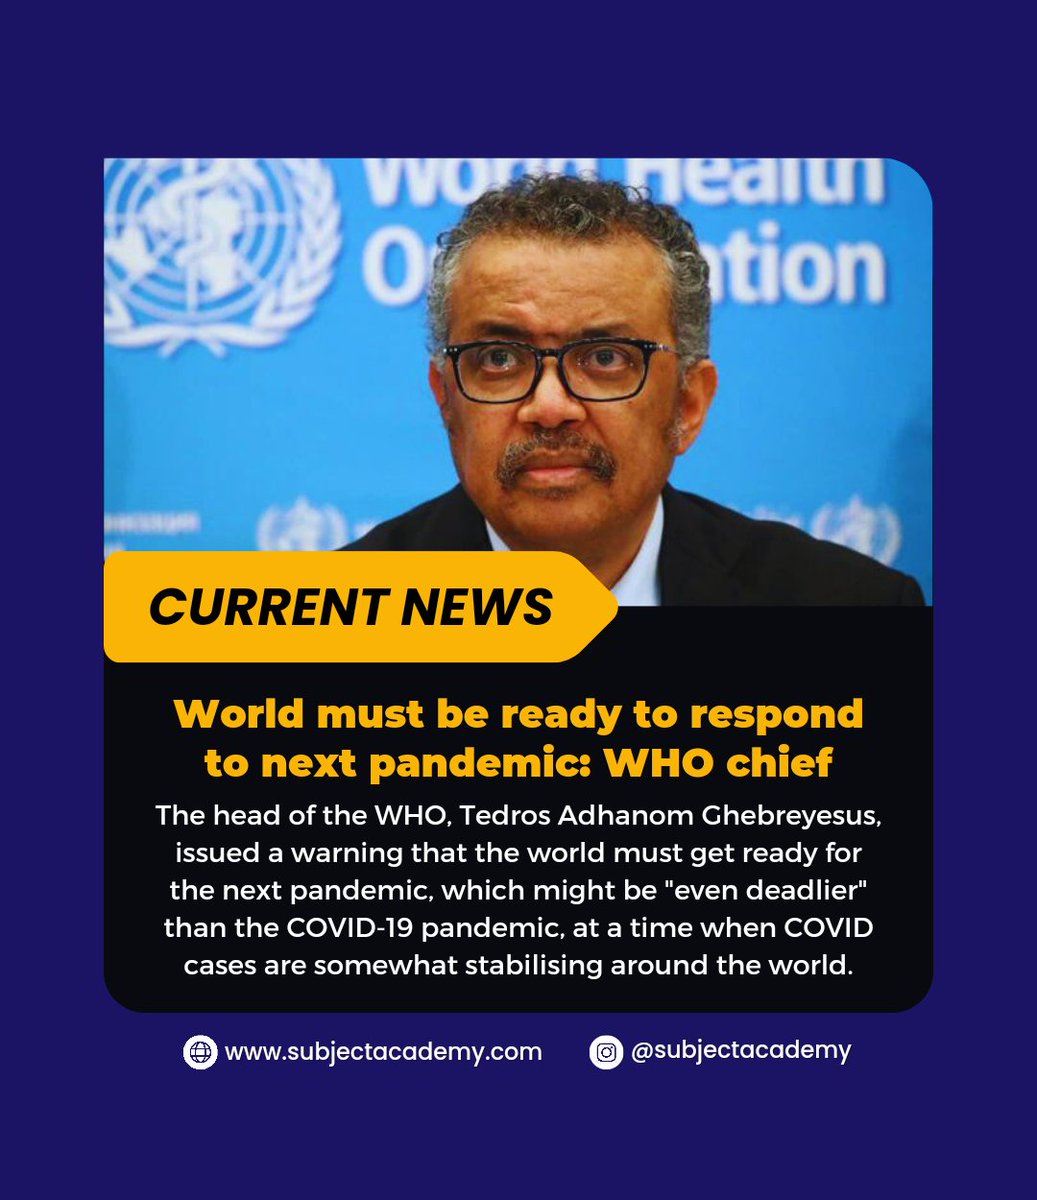 Tedros Adhanom Ghebreyesus has warned that the world should be ready for the next pandemic, which might be “even deadlier” than Covid-19.
-
Follow for more posts like this!
.
.
.
.
.
#covid #coronavirus #corona #lockdown #dirumahaja #quarantine #d #socialdistancing #cov #WHO